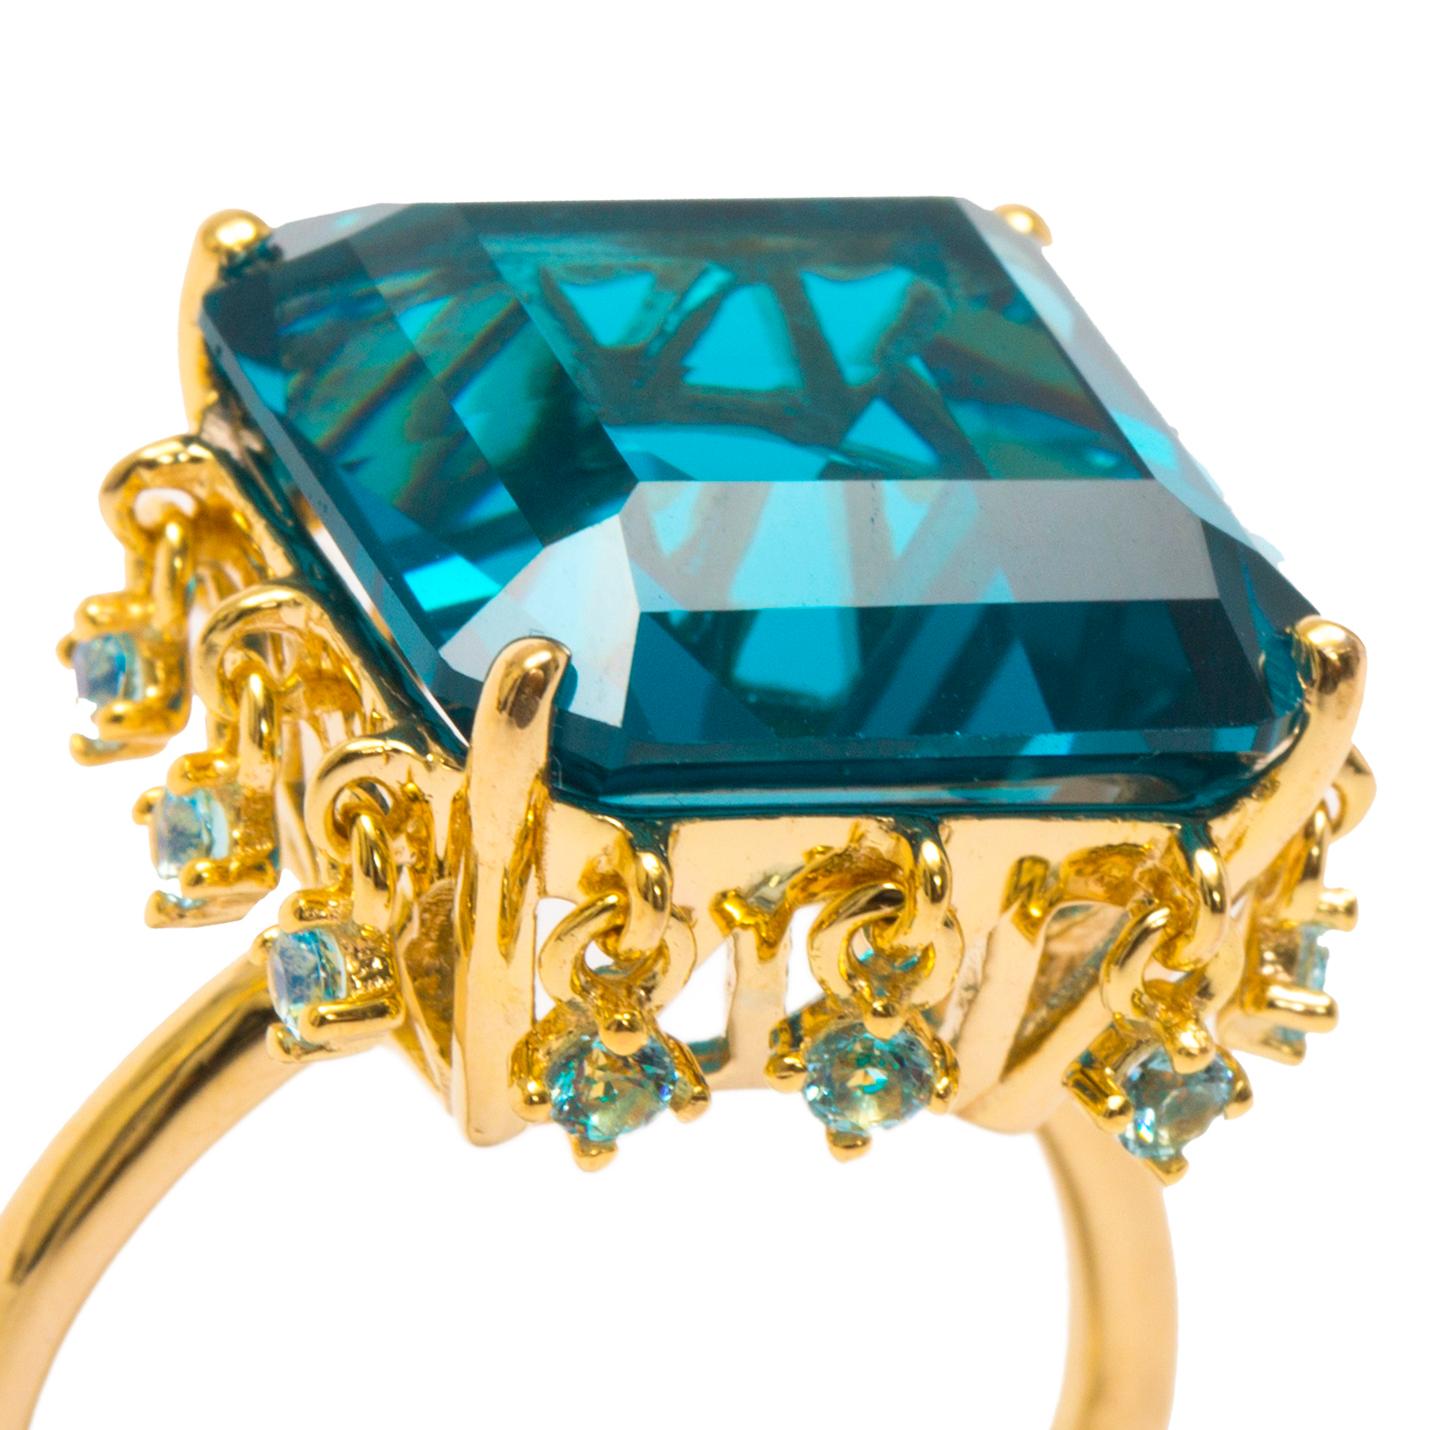 Part of AMMANII new Malikat = Queens collection- inspired by the ruling females of ancient Egypt. A dazzling ring to signify the queen's crown. Hand crafted vermeil gold with hand cut statement blue topaz and charm stones around it. May the beauty